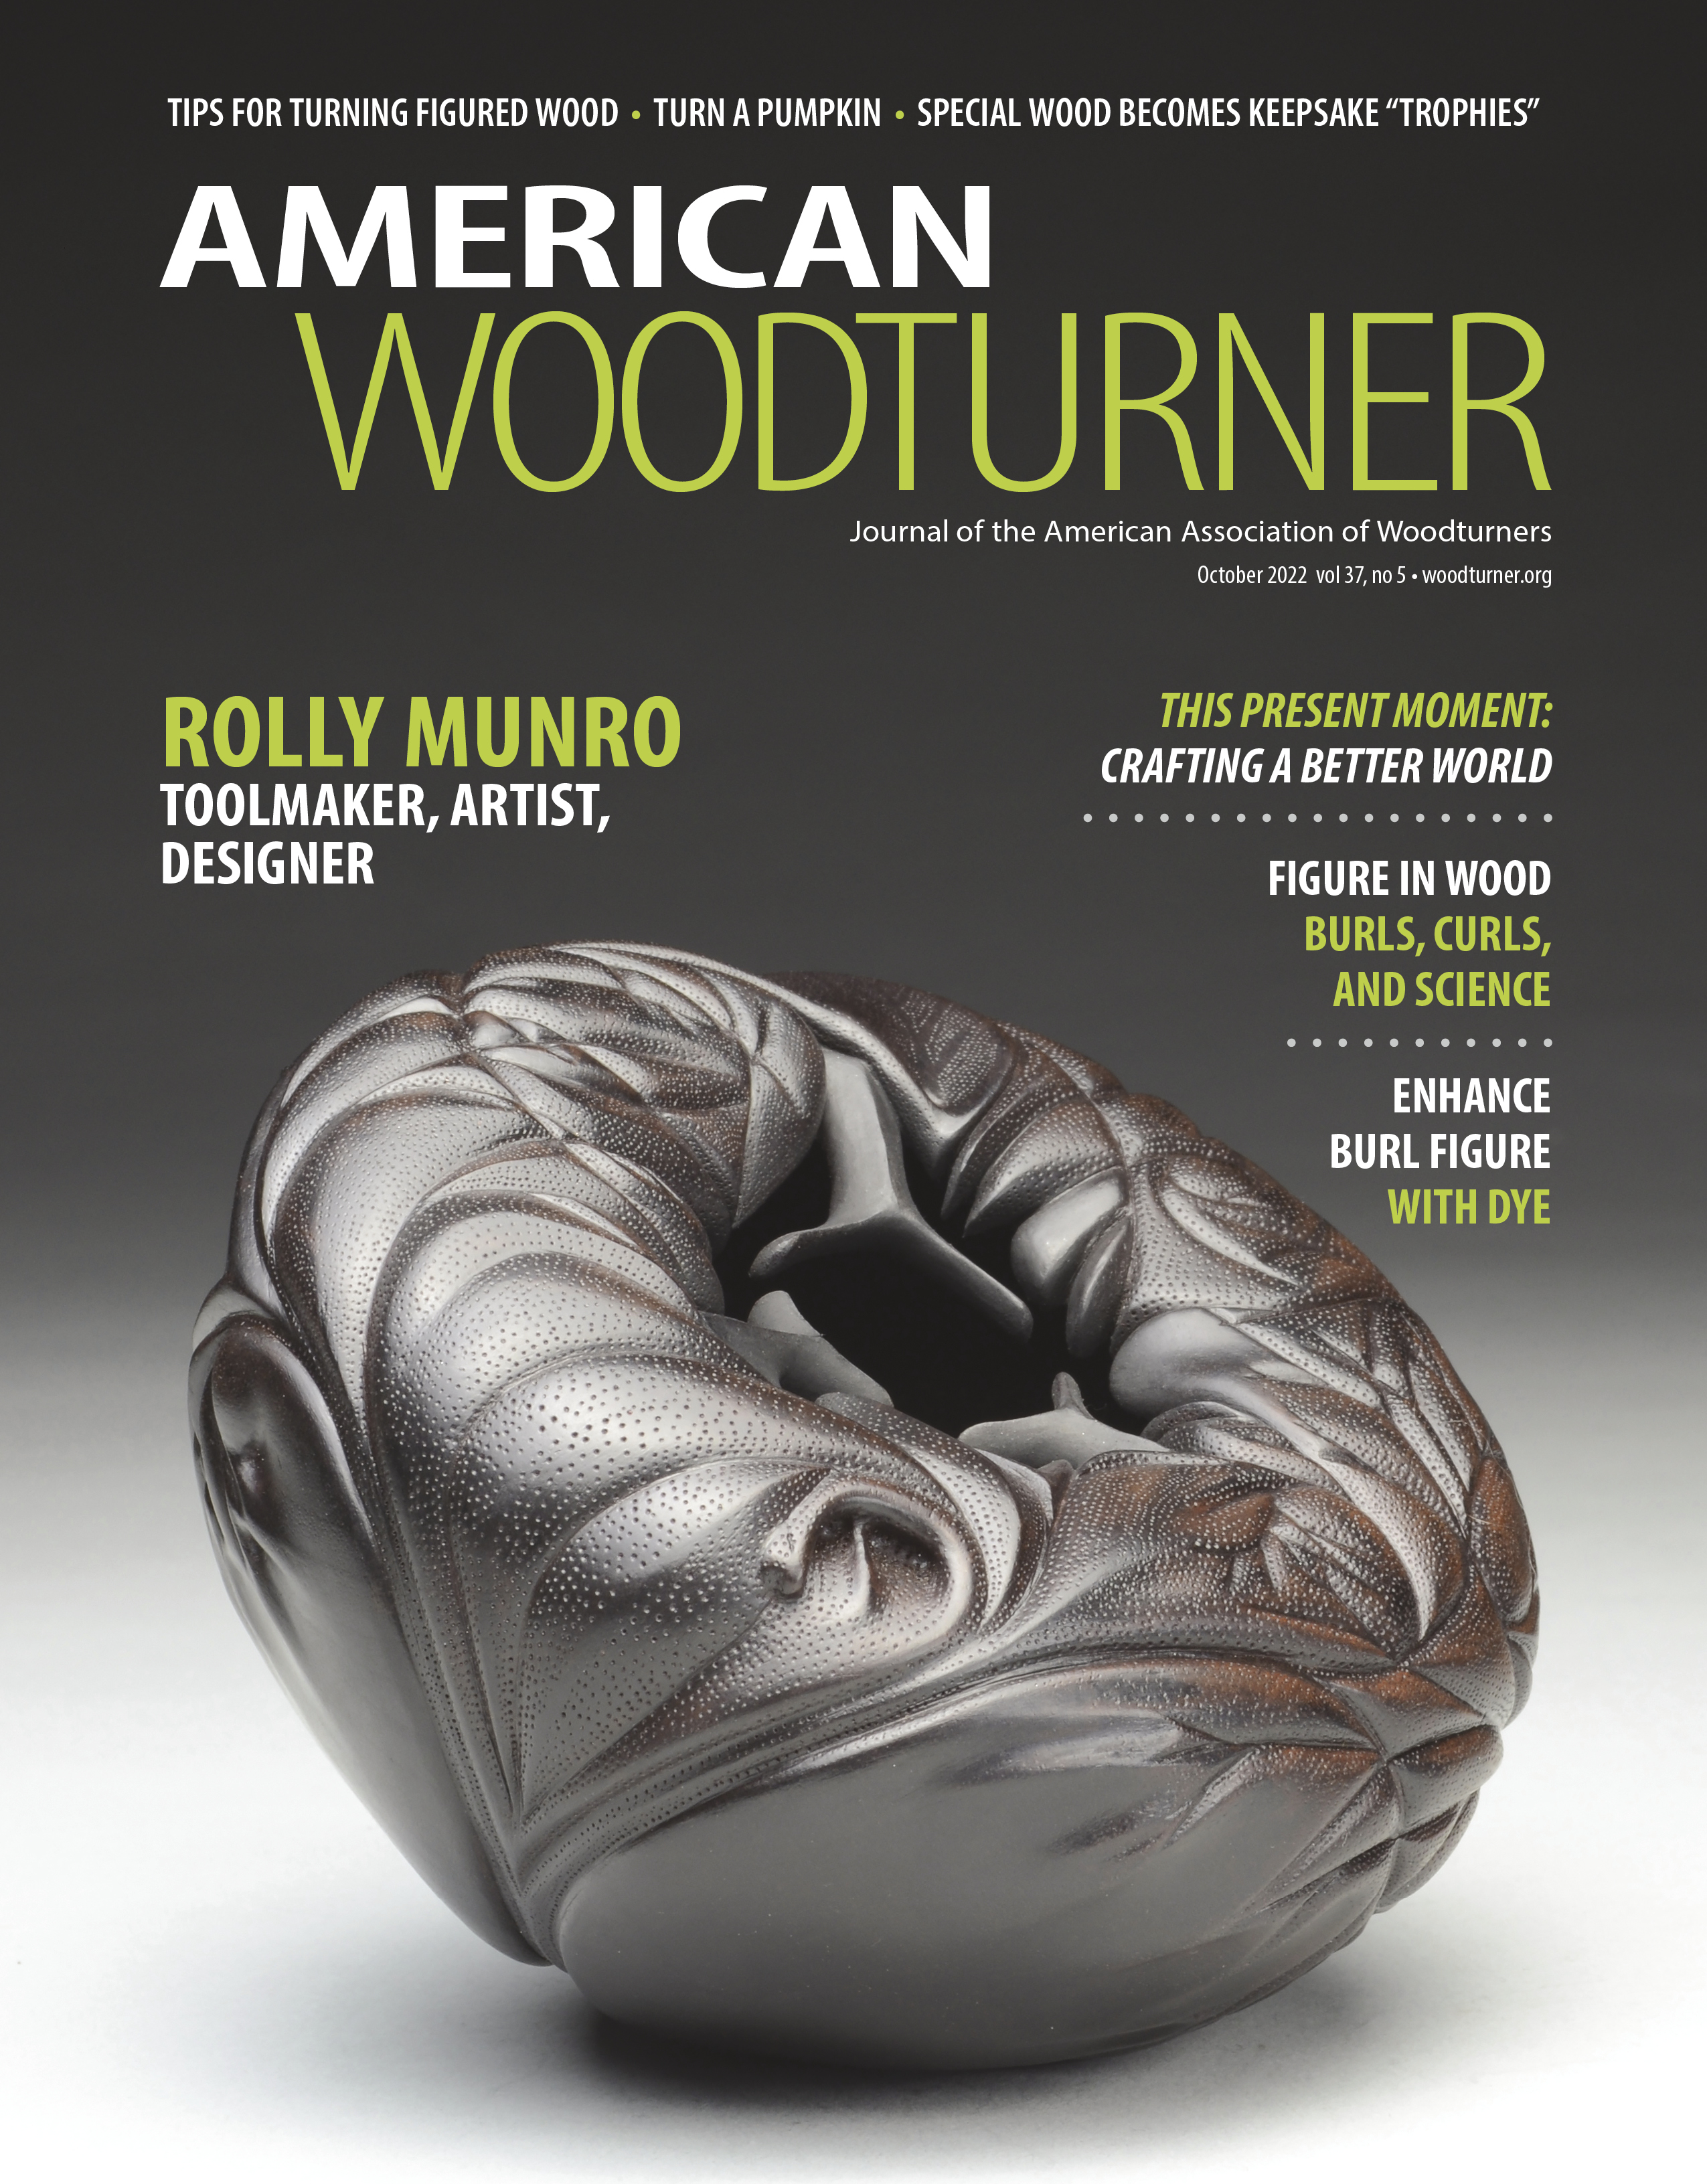 American Woodturner 37 issue 5 Replacement